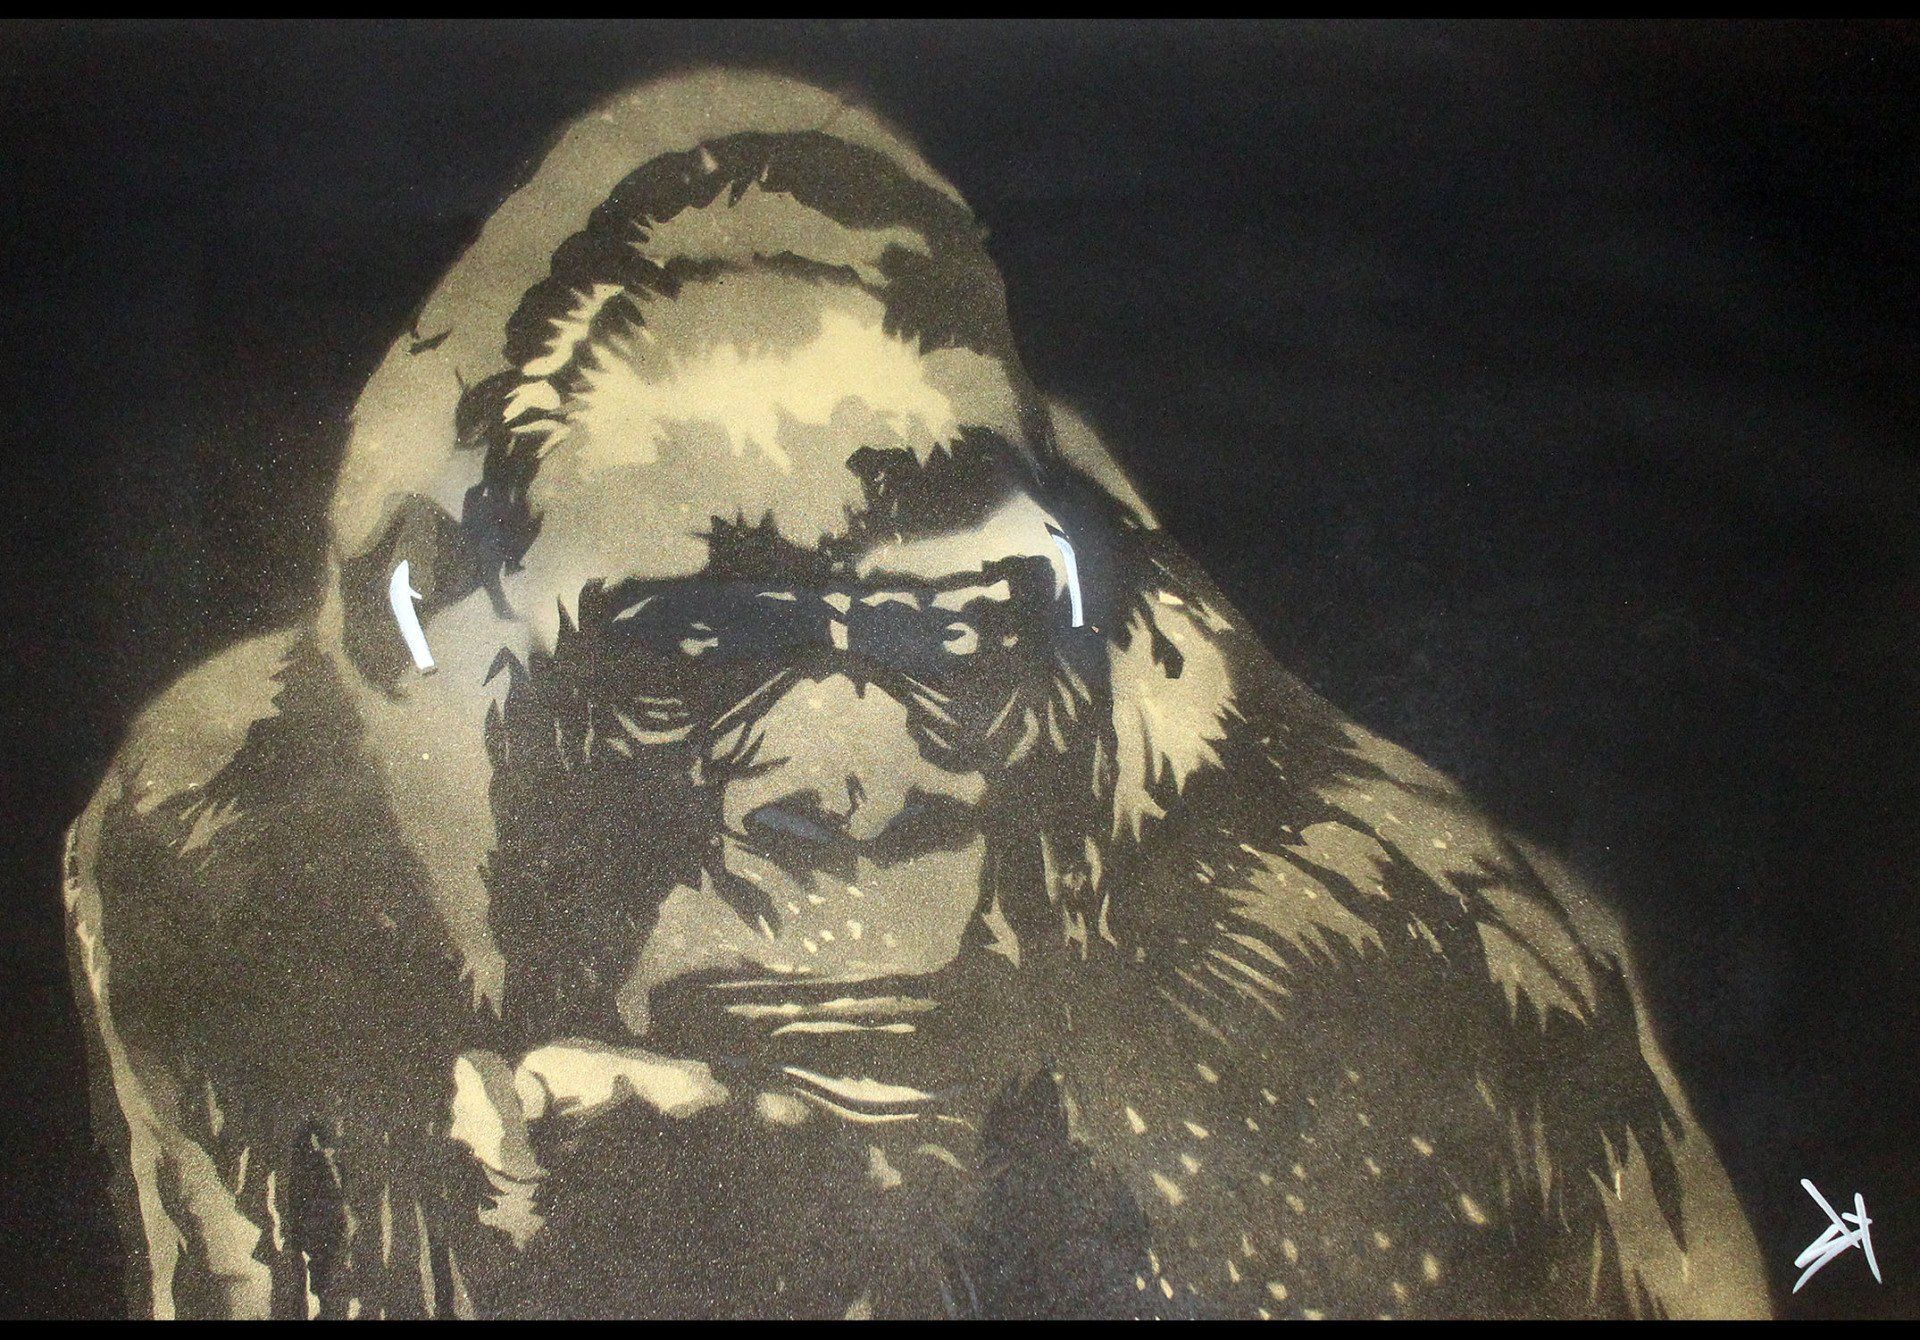 Urban Pop art by Sly. Gorilla in the groove.